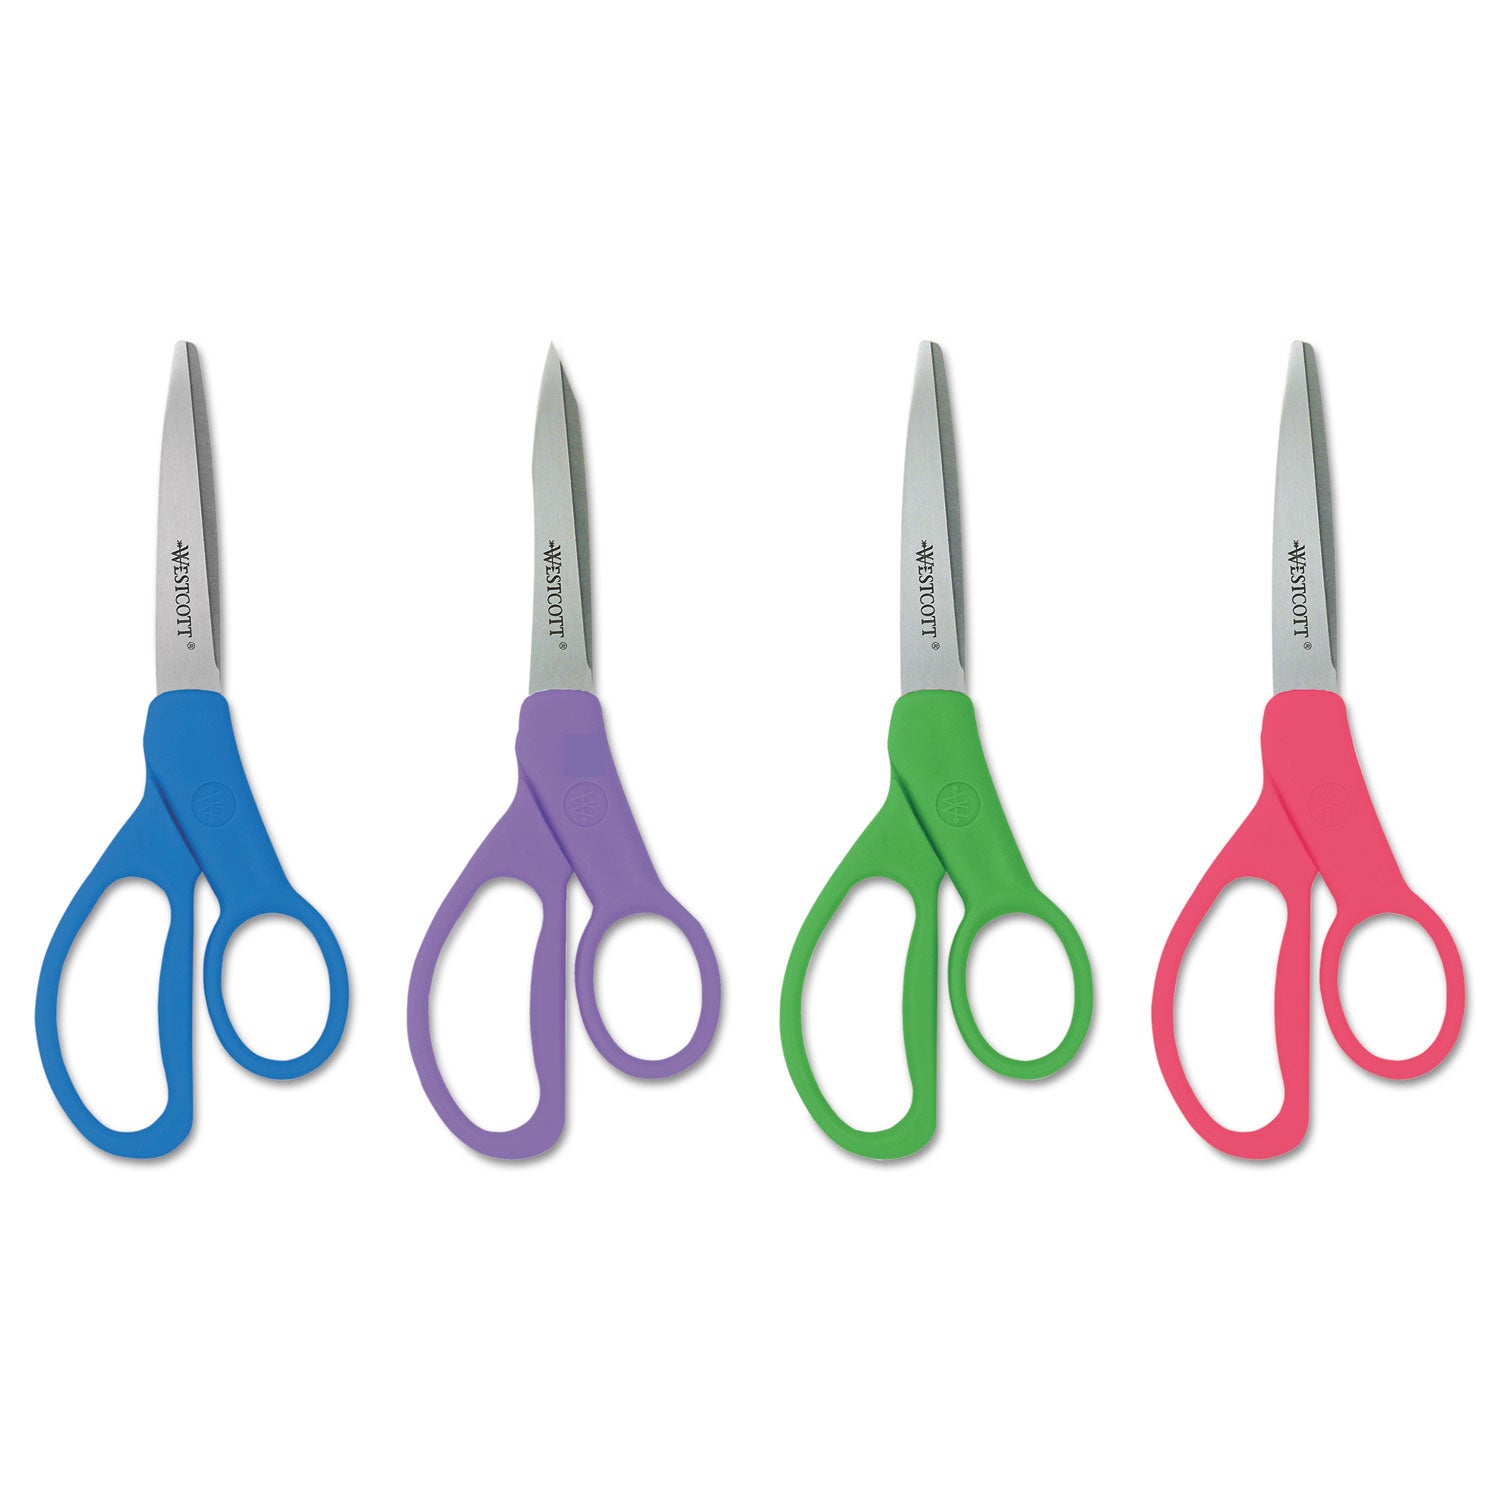 Student Scissors with Antimicrobial Protection, Pointed Tip, 7" Long, 3" Cut Length, Randomly Assorted Straight Handles - 